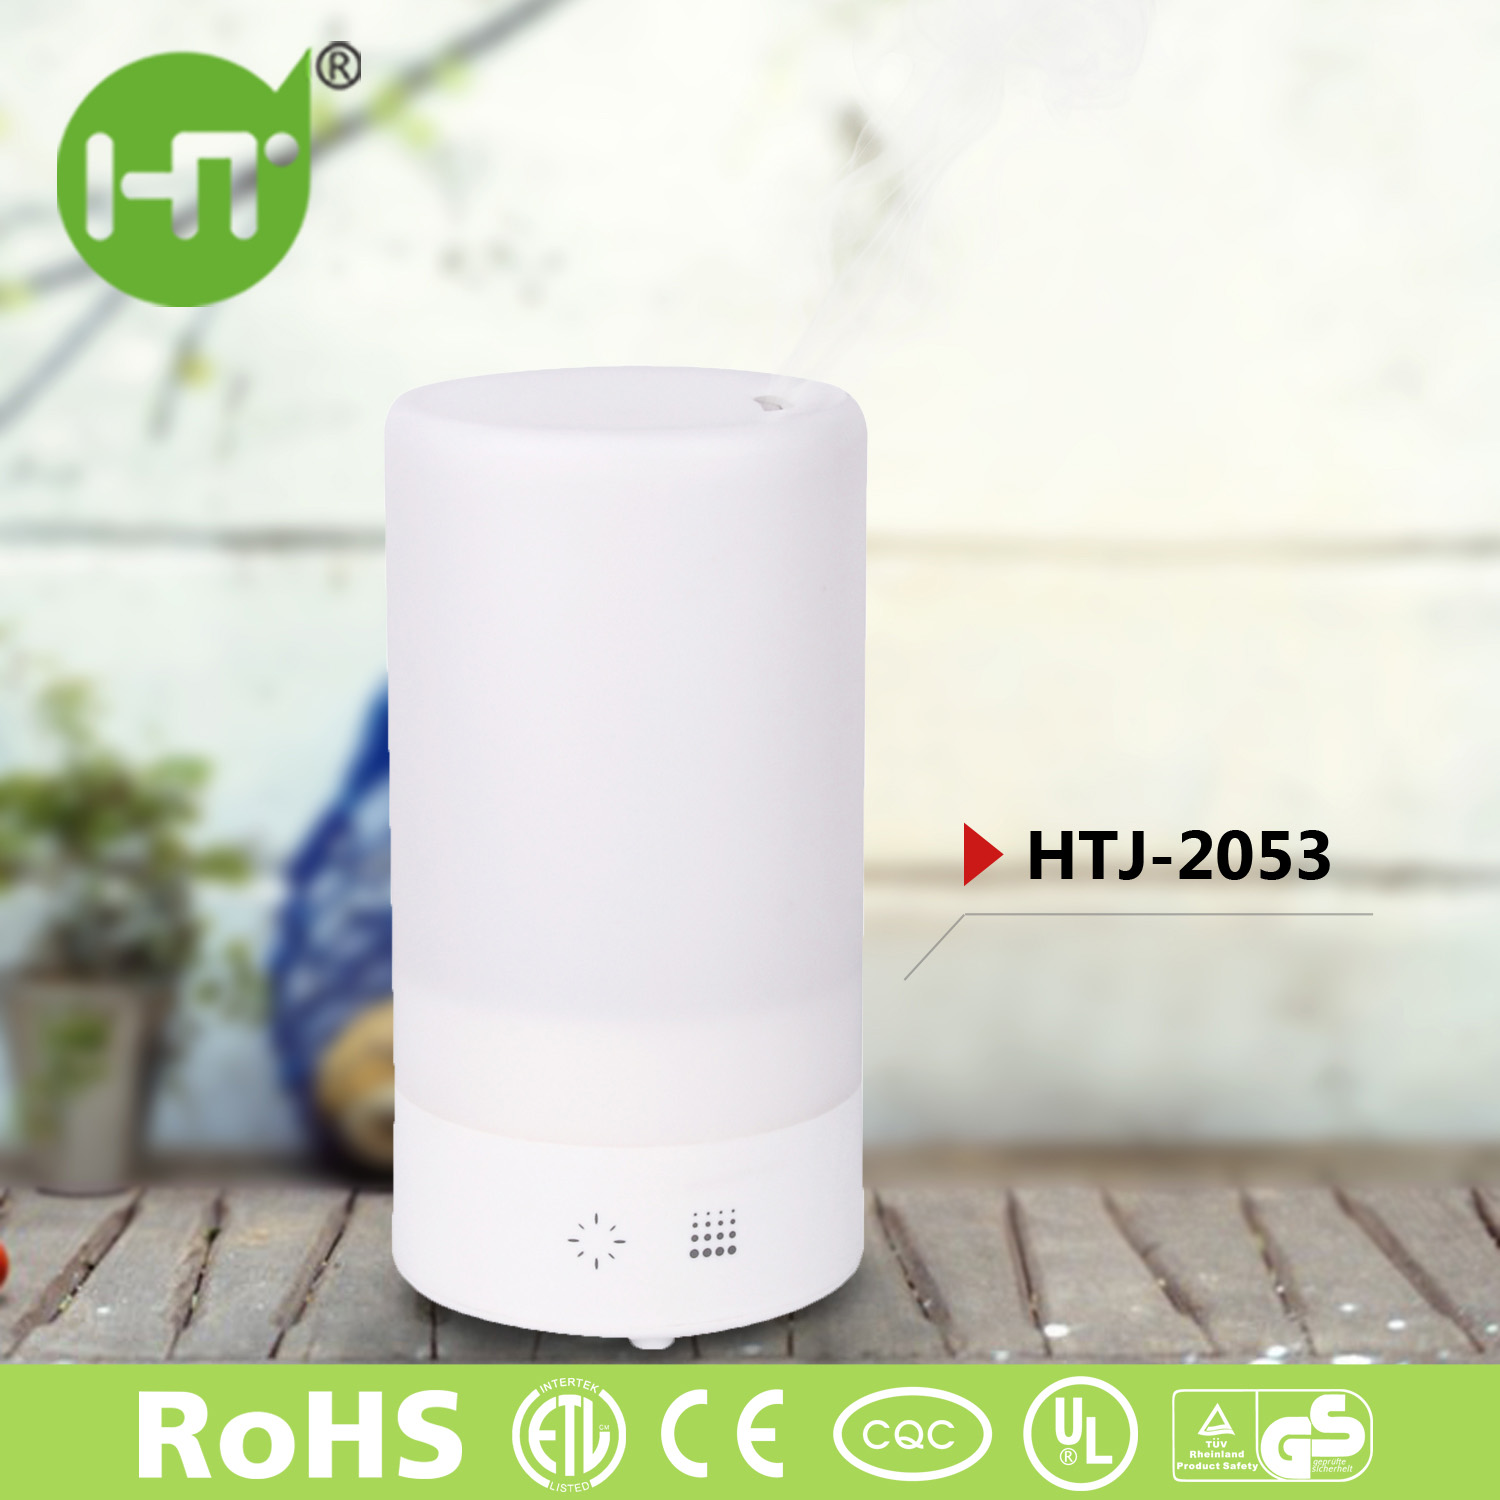 HTJ-2053 0.8L Mini Air Cooler Aromatherapy Ultrasonic Aroma Essential Oil Available Humidifier